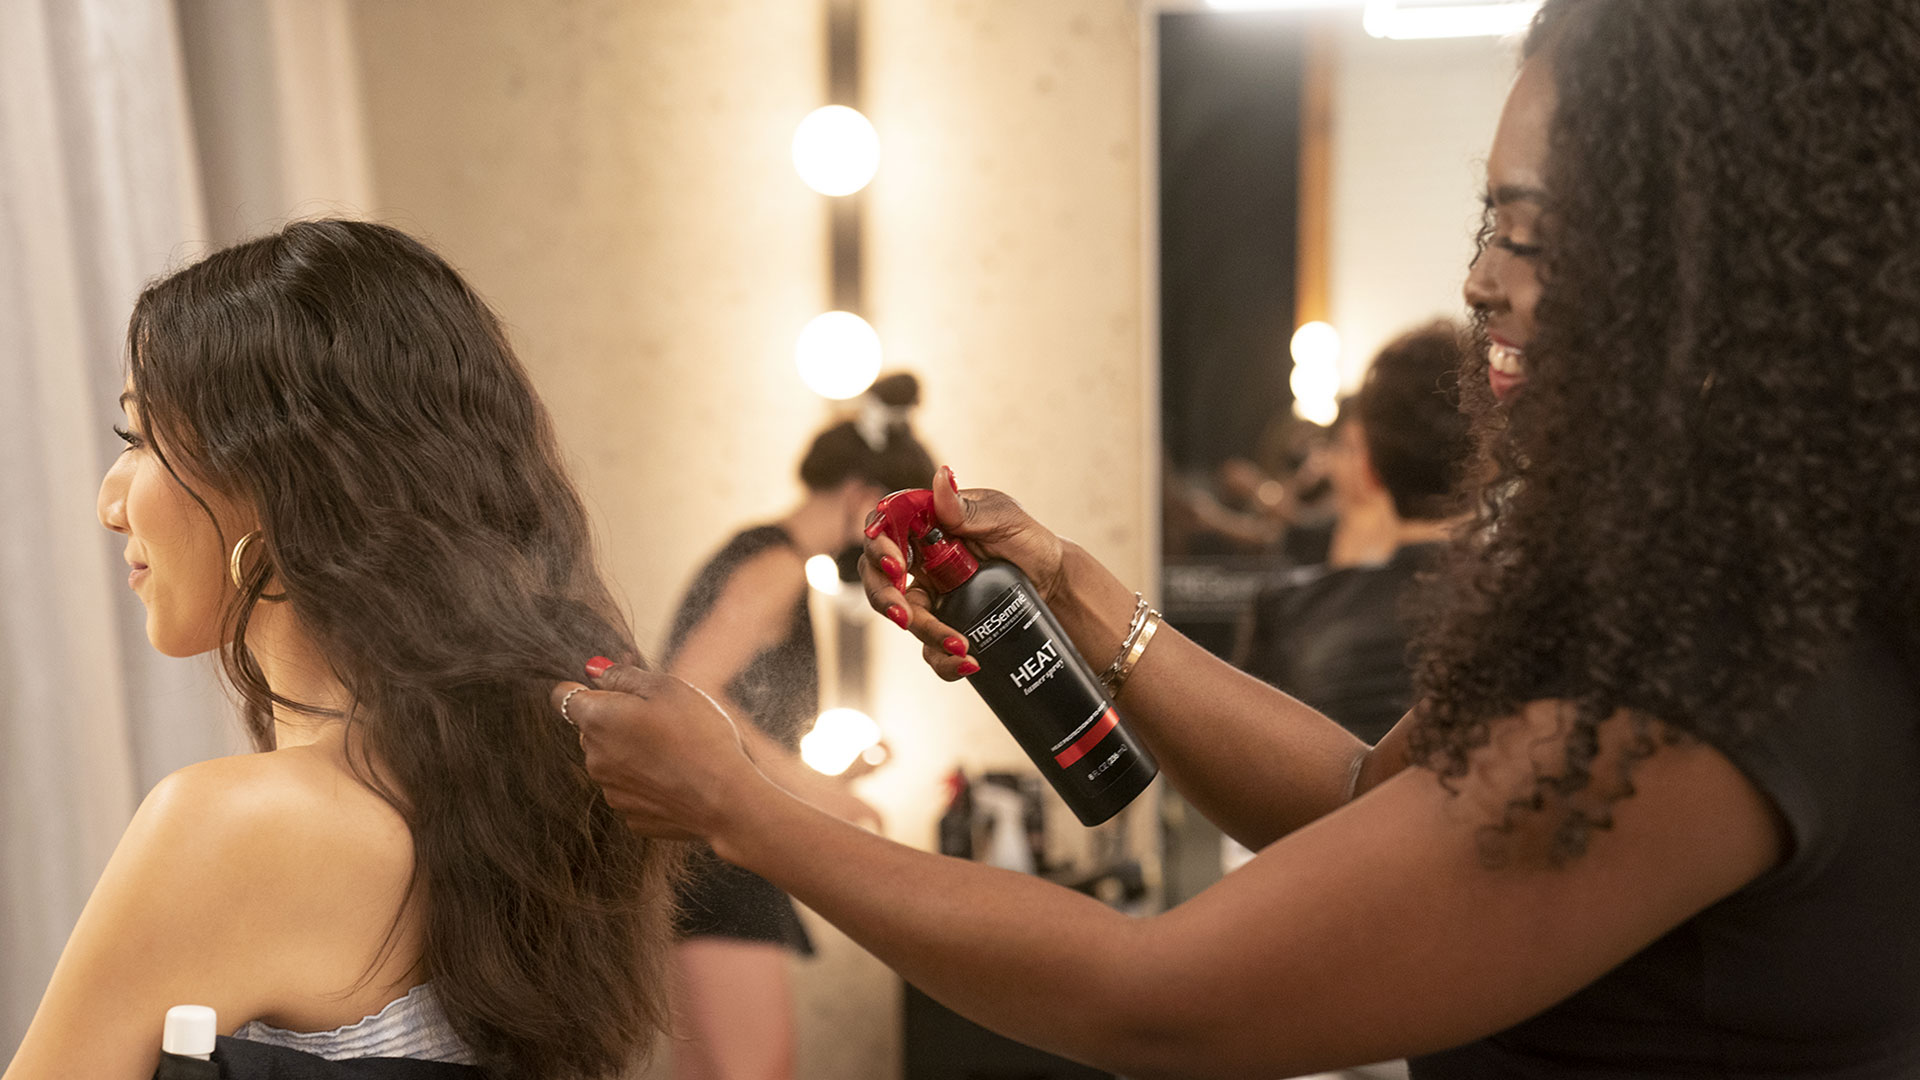 Project Runway Shows How This "Old School" Hair Staple Can Still Serve Up Fresh New Looks